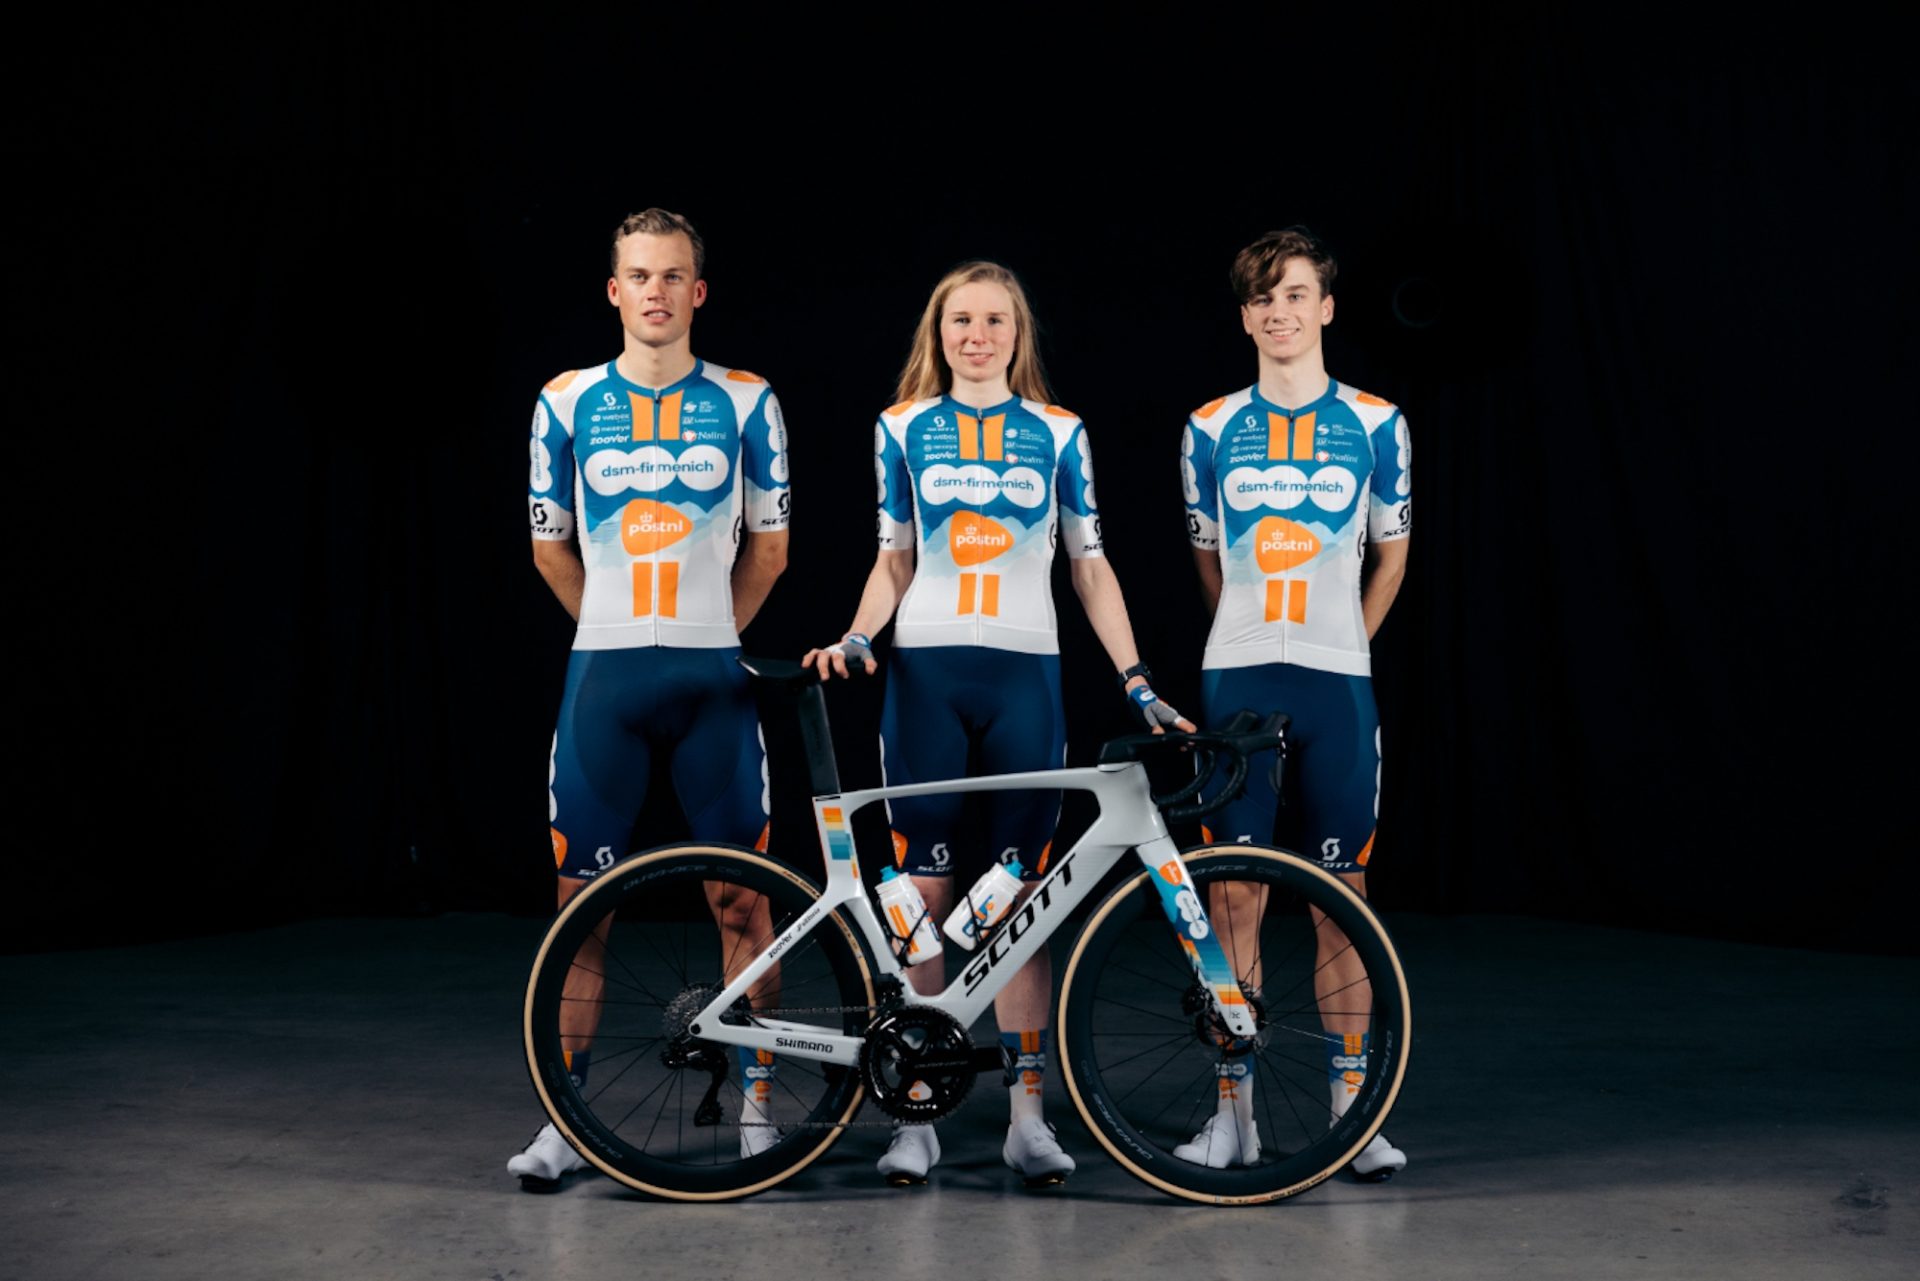 DSM Firmenich-PostNL riders display their new kit and bikes. Two male on either side of one female. The jerseys are white with a medium-blue block on the upper chest, a double orange stripe down the middle broken up by DSM and PostNL logos in white and orange, and a white lower half.